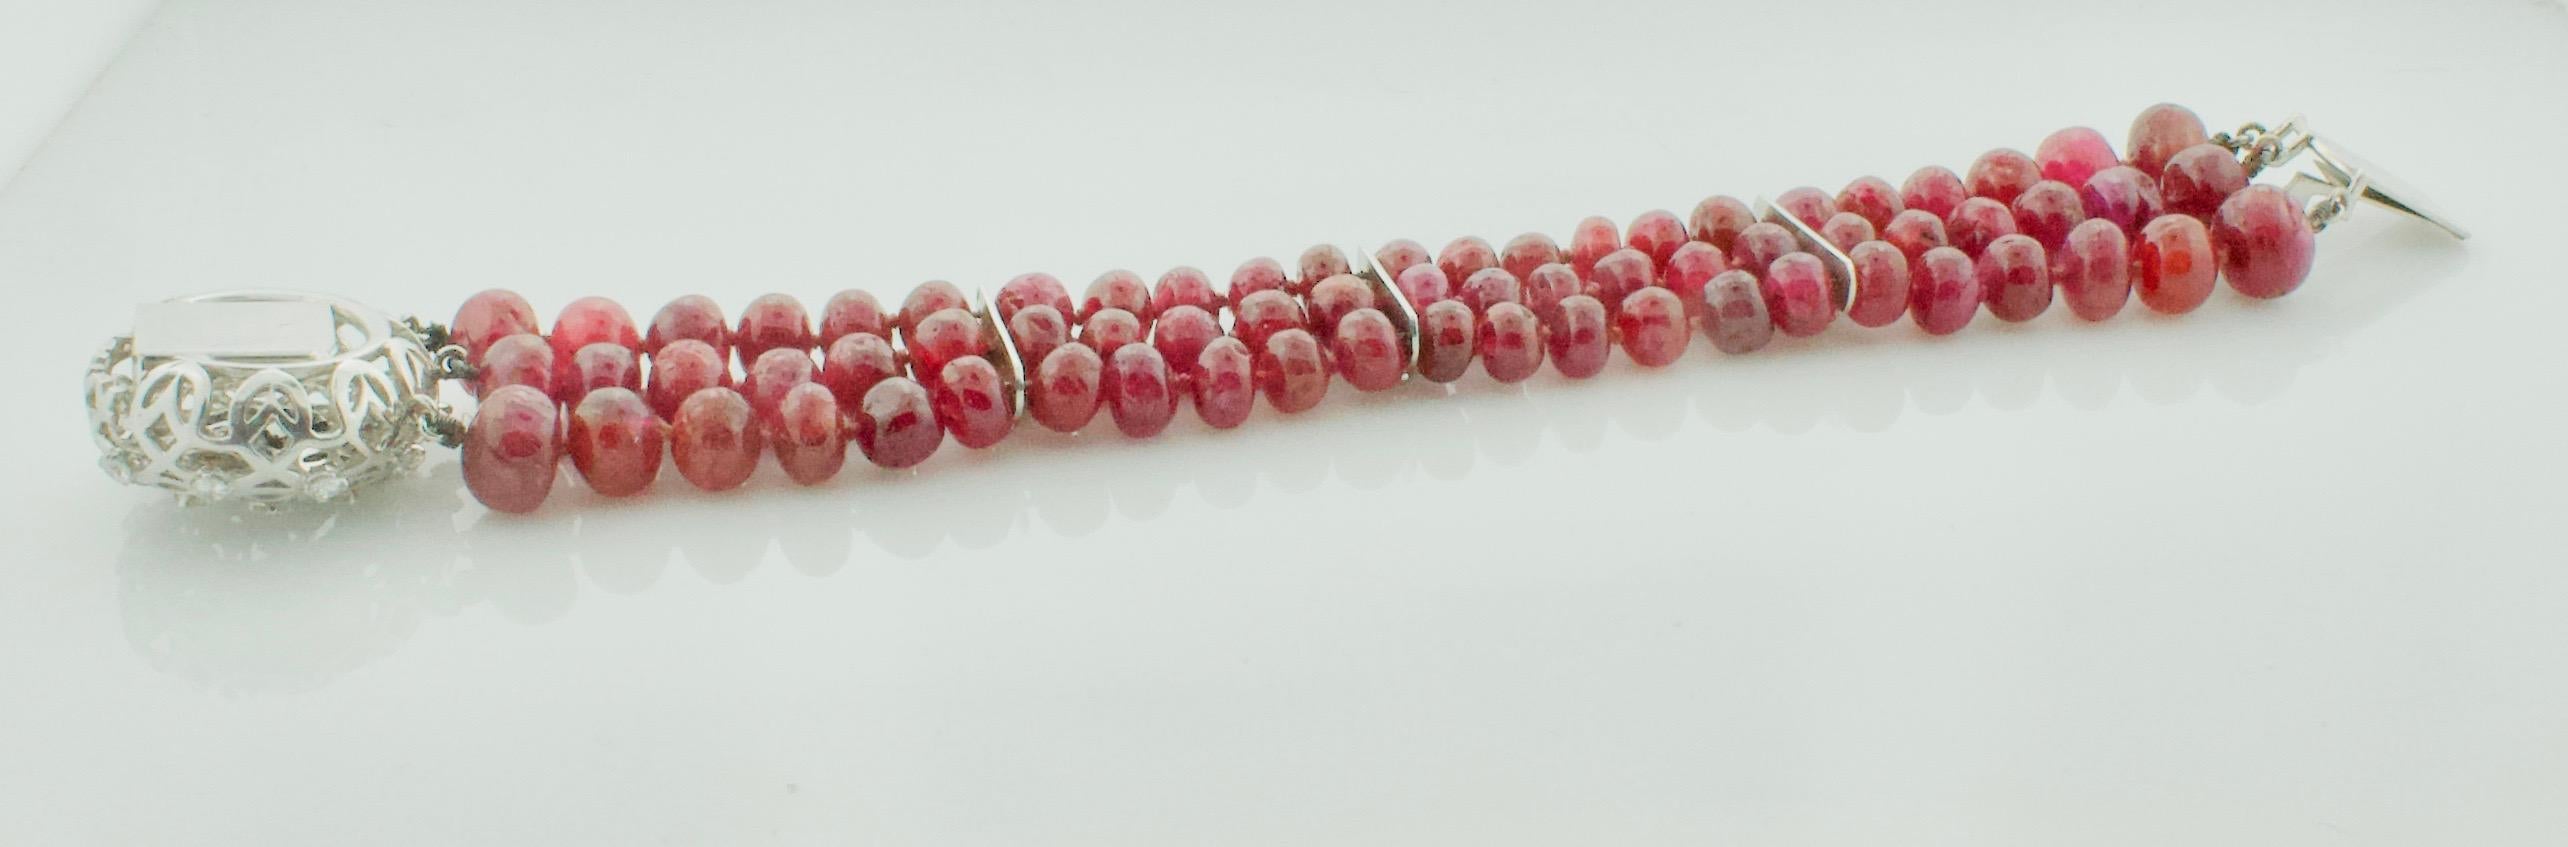 225 Carats Ruby Bead and Diamond Bracelet in White Gold Circa 1950's In Excellent Condition For Sale In Wailea, HI